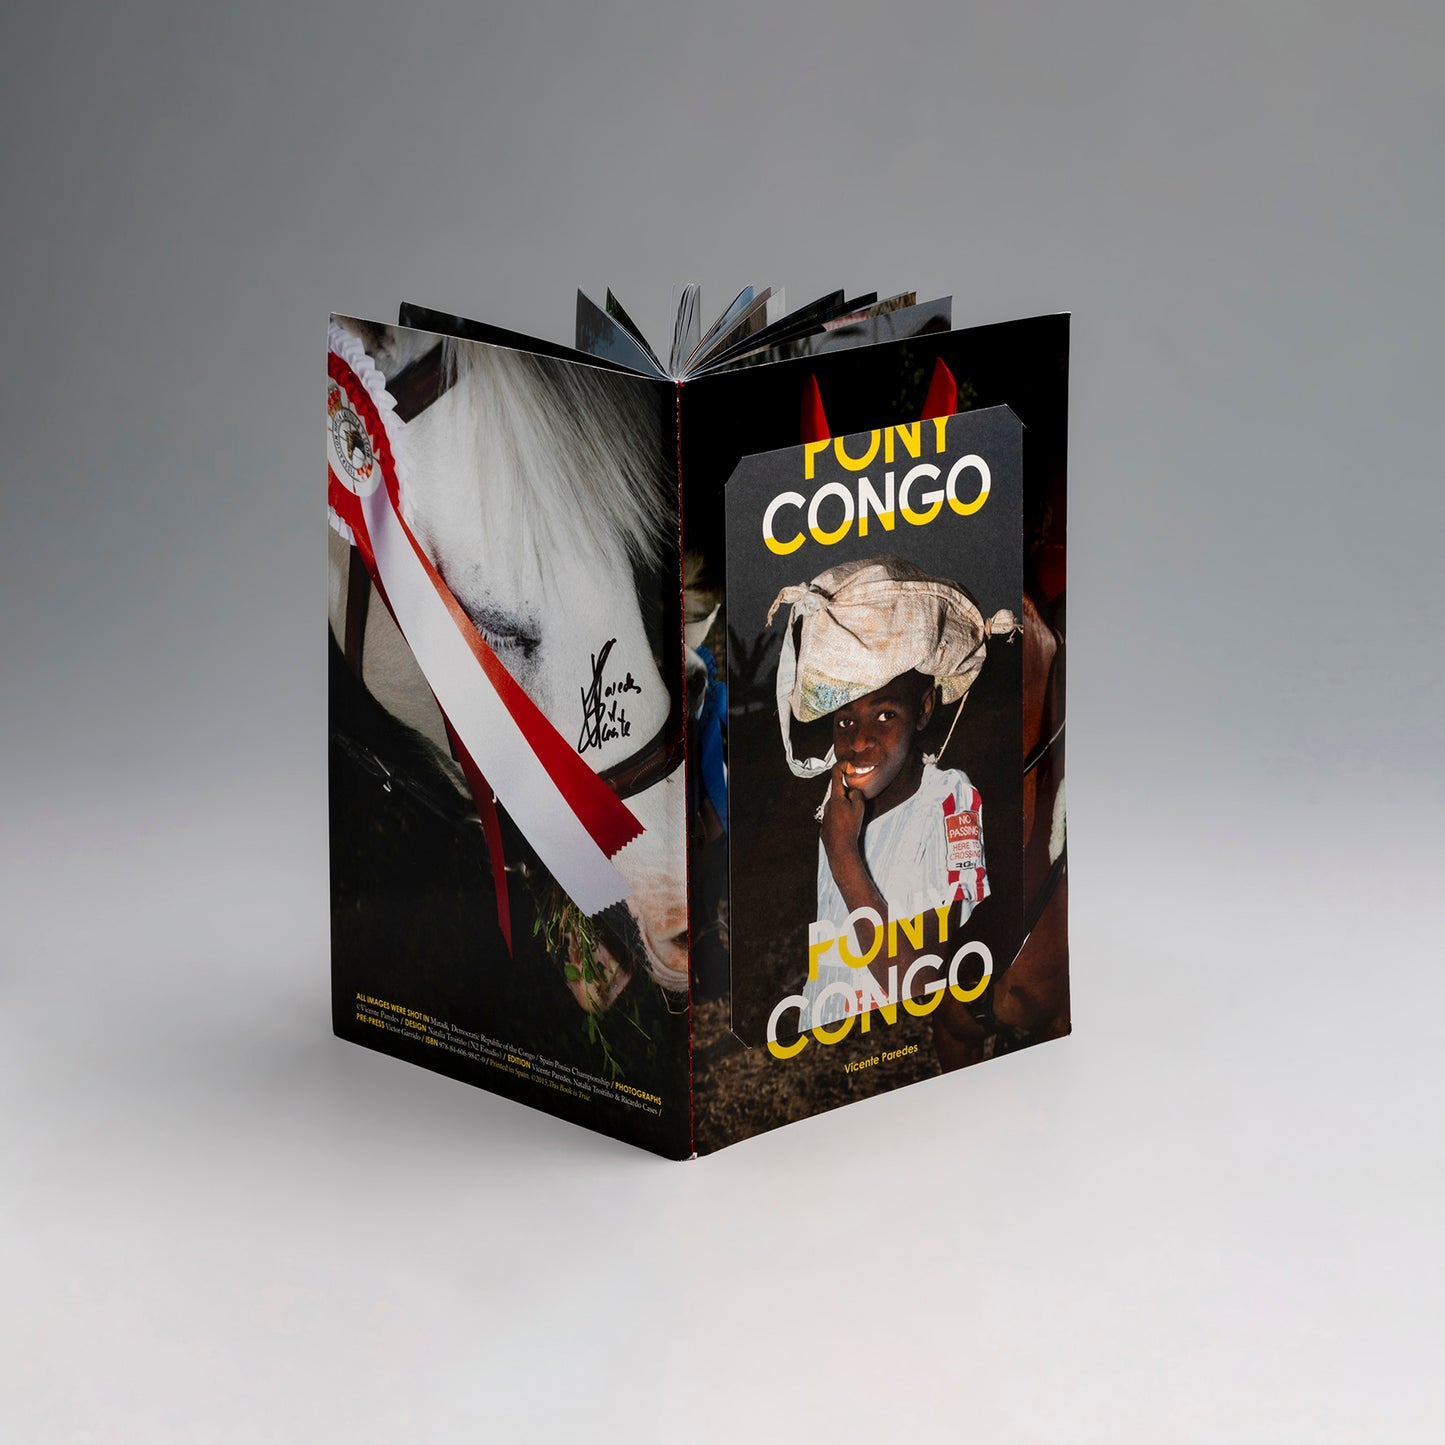 Pony Congo by Vicente Paredes SIGNED